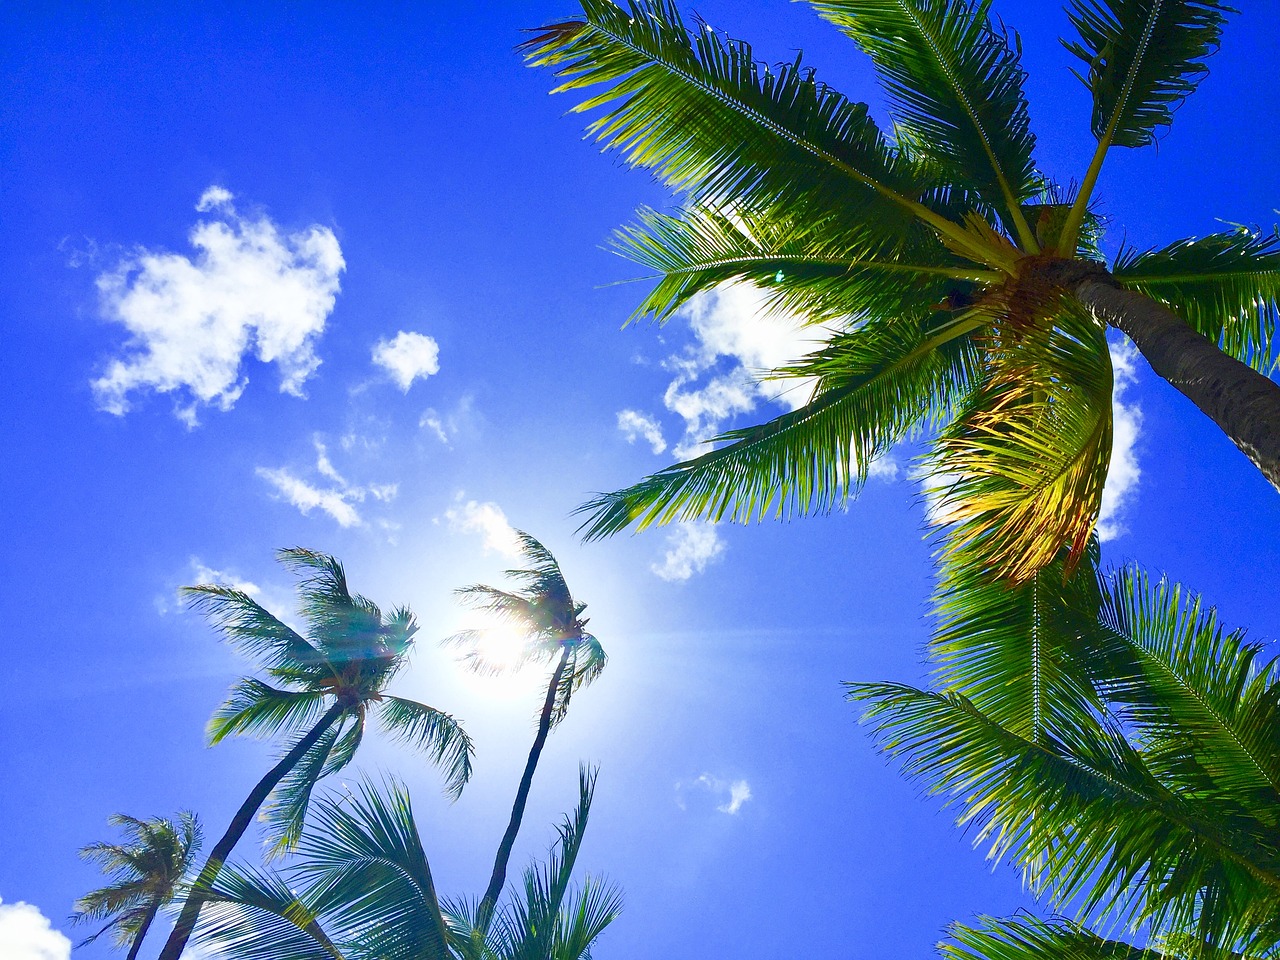 Photo of the Sky and Palm Trees from Our Hawaii Summer Rentals.